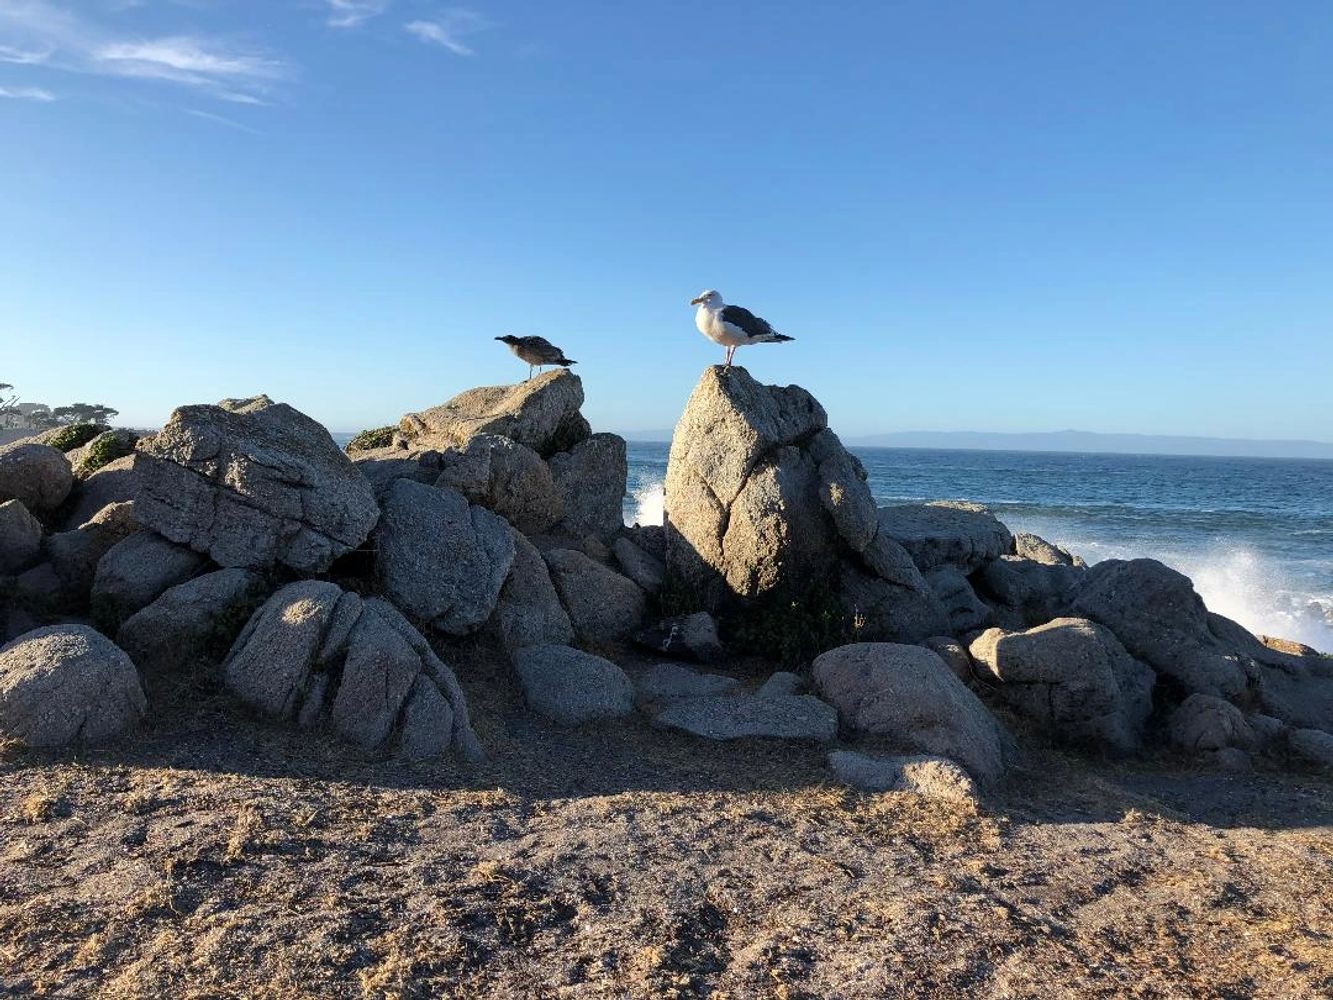 Two birds standing atop rocks, with waves crashing in the background
